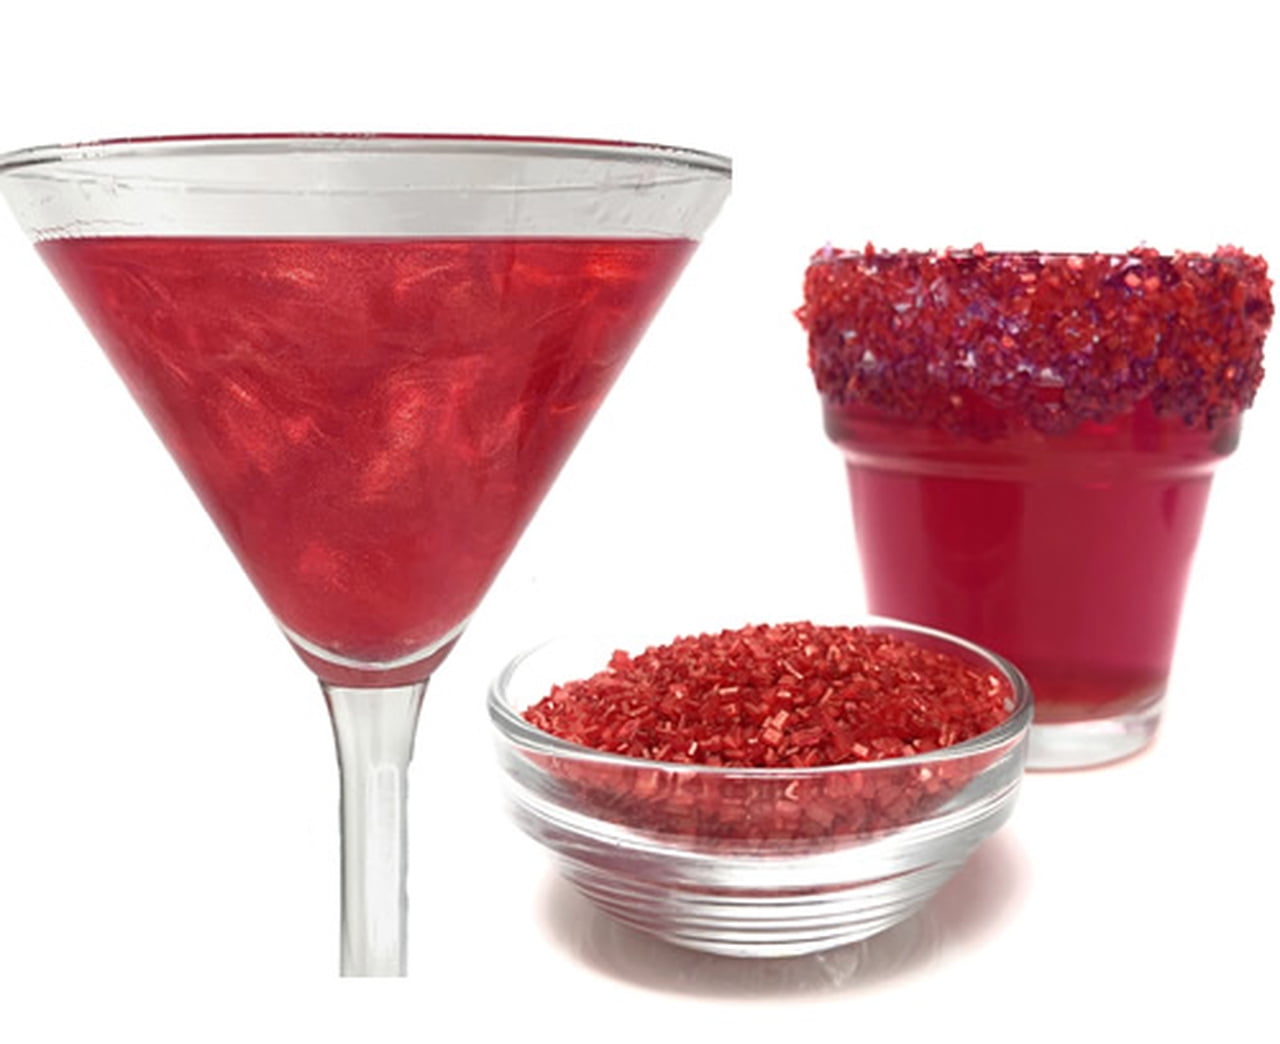 Snowy River Pink Cocktail Sugar-Glitter Pack ,cocktail glitter